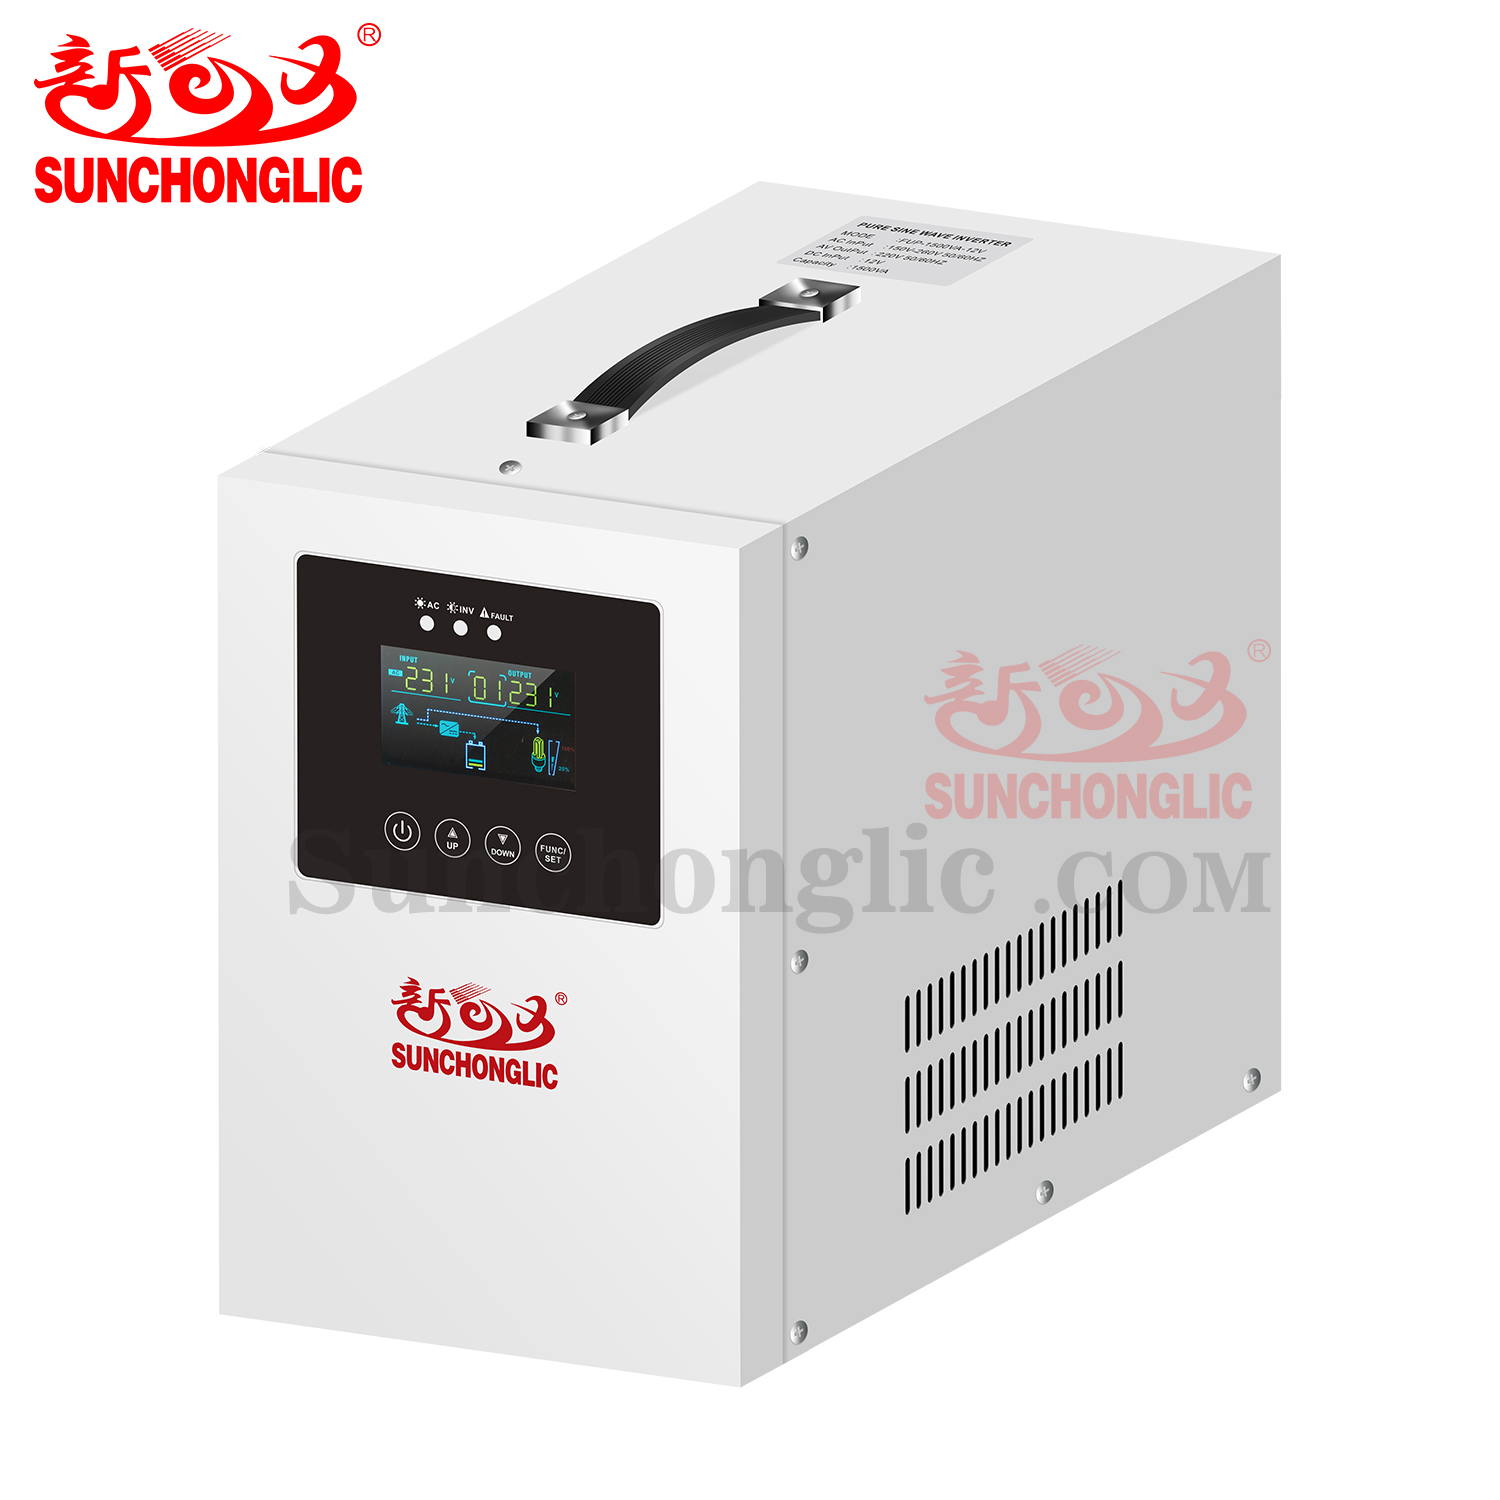 Sunchonglic 1500va 1000w pure sine wave low frequency UPS home solar power inverter charger